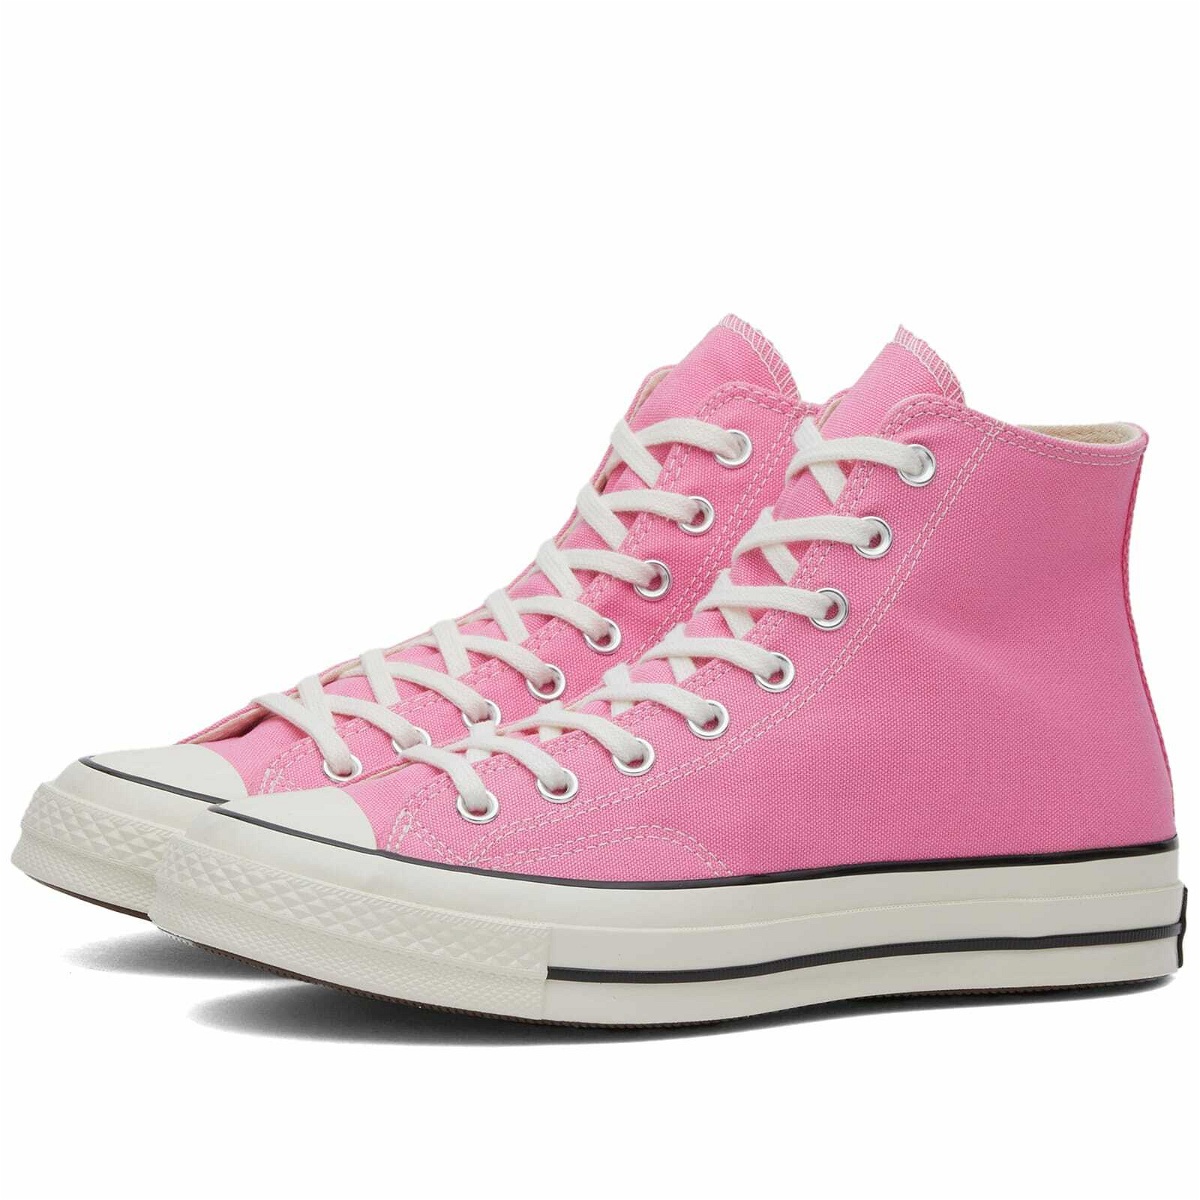 Photo: Converse Chuck Taylor 1970s Hi-Top Sneakers in Pink/Egret/Black